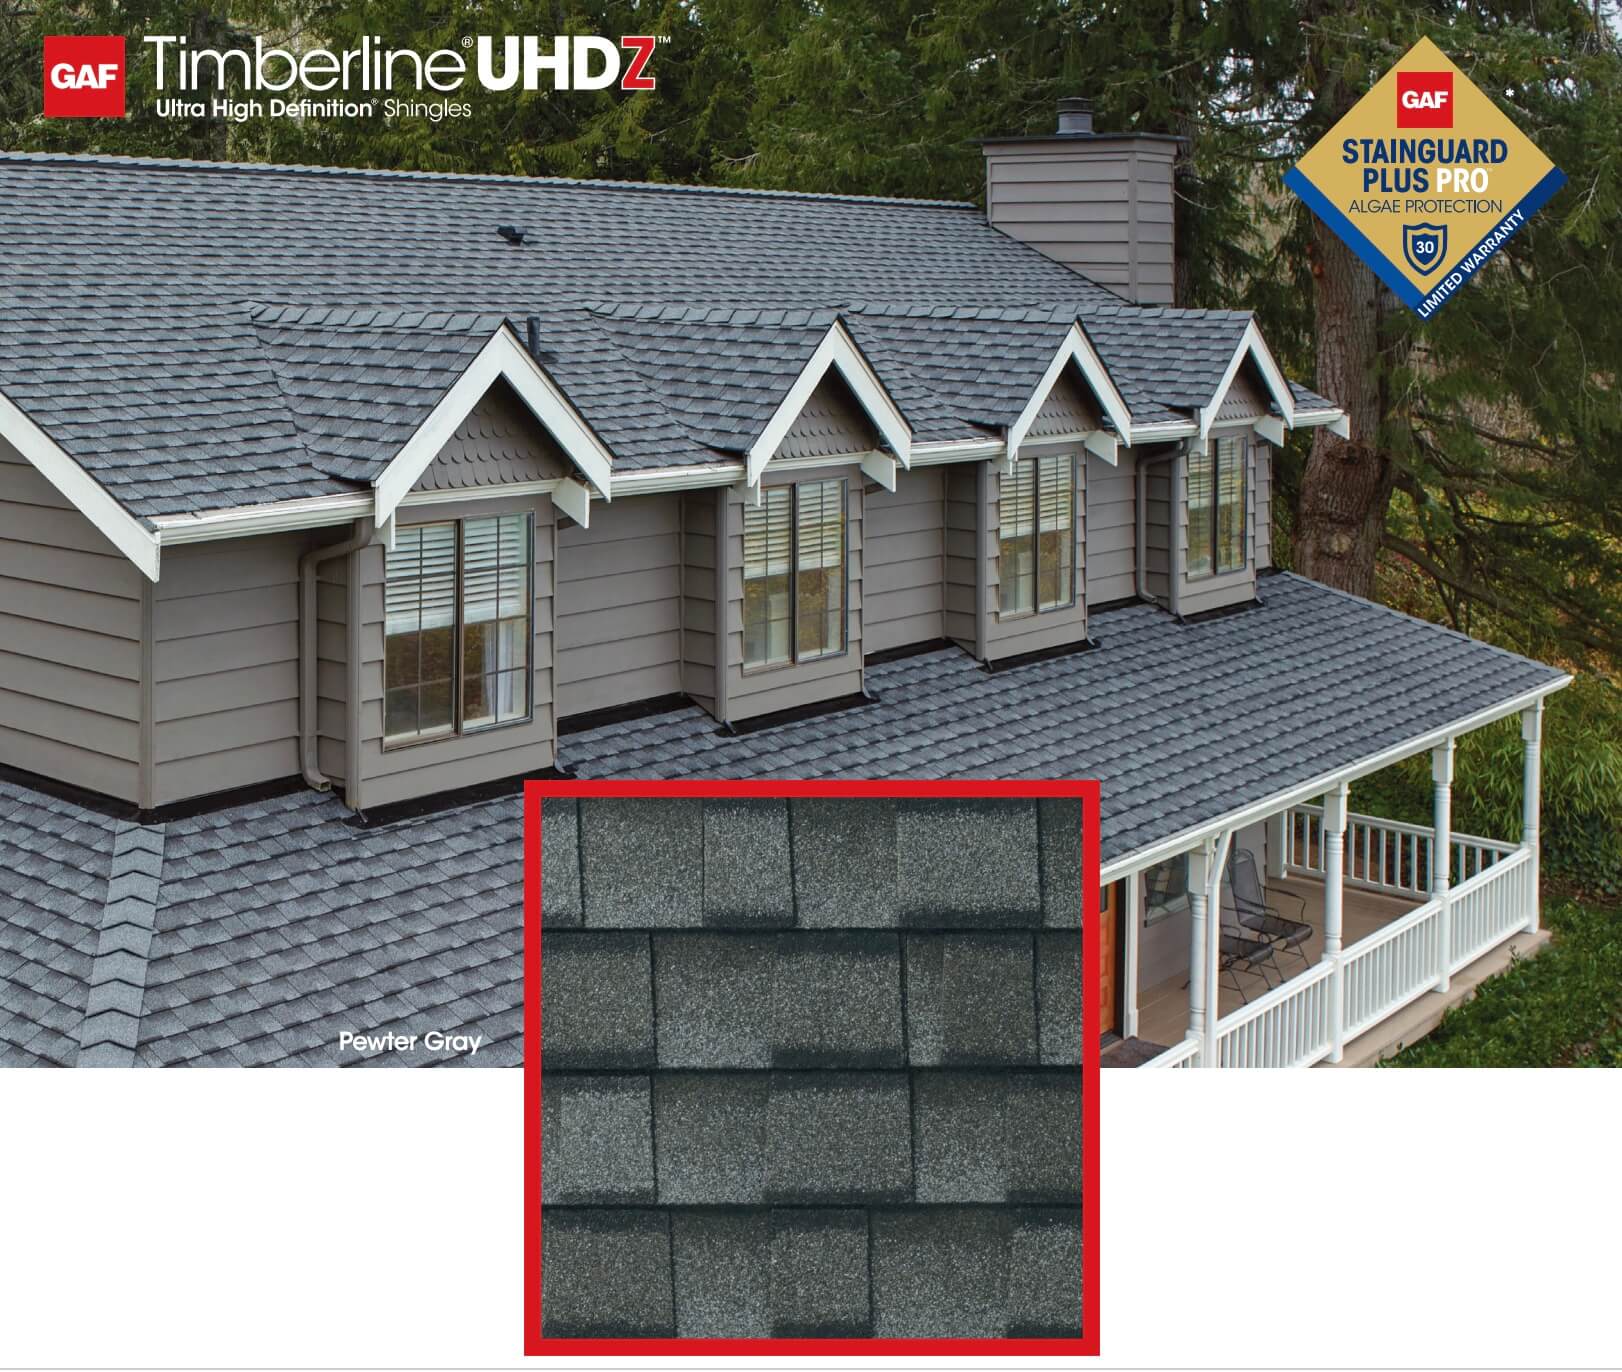 GAF Timberline UHDZ shingle close up with a home in the background